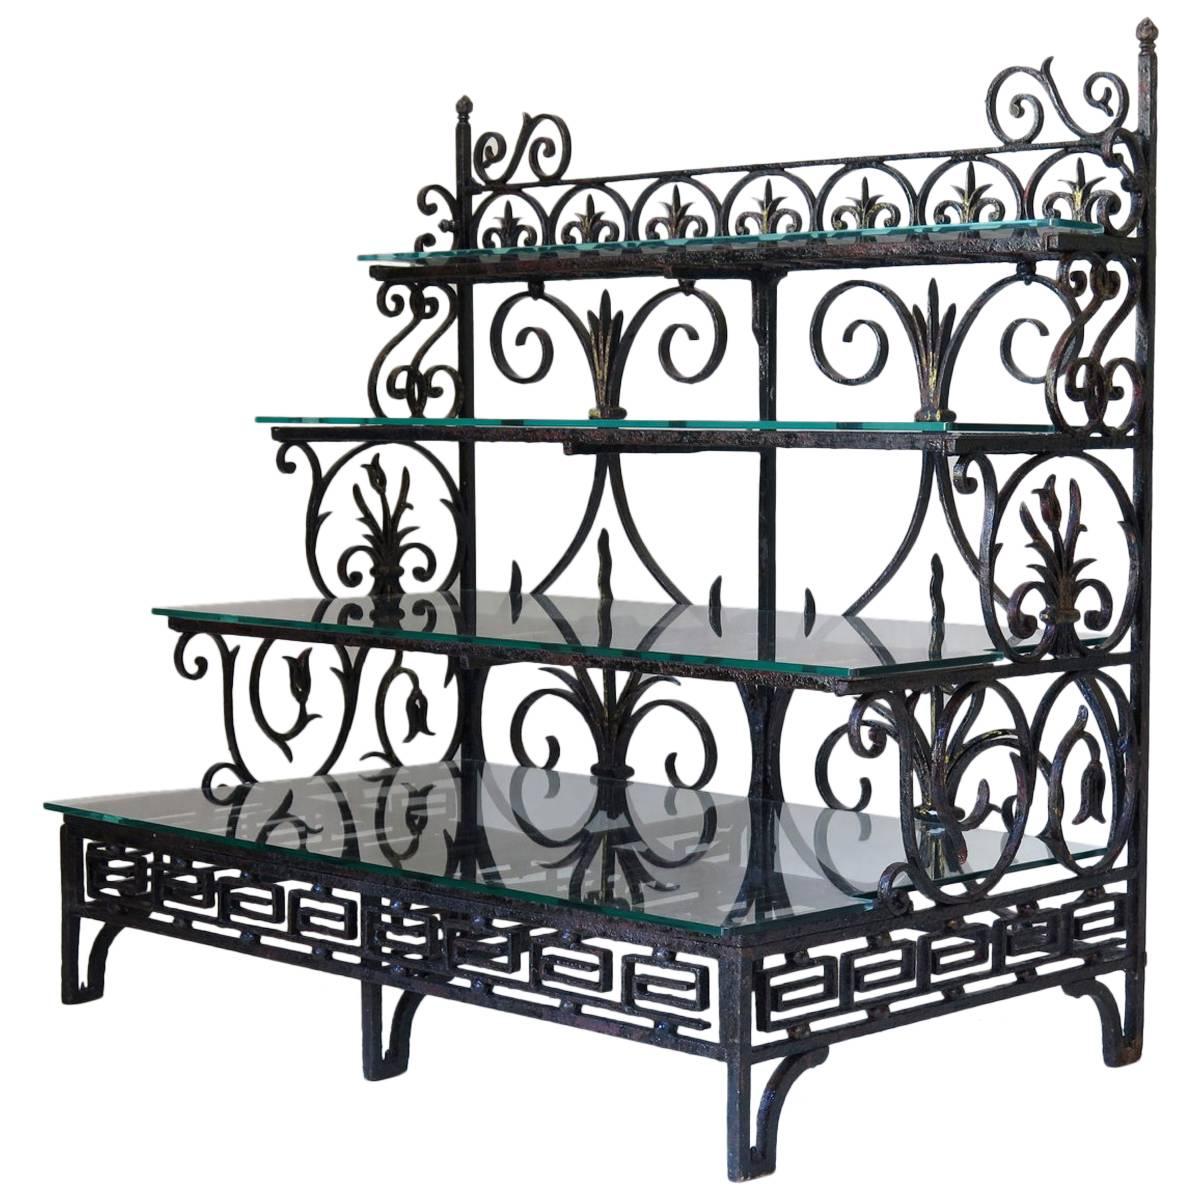 French Wrought-Iron Shelves, Dated "1889"